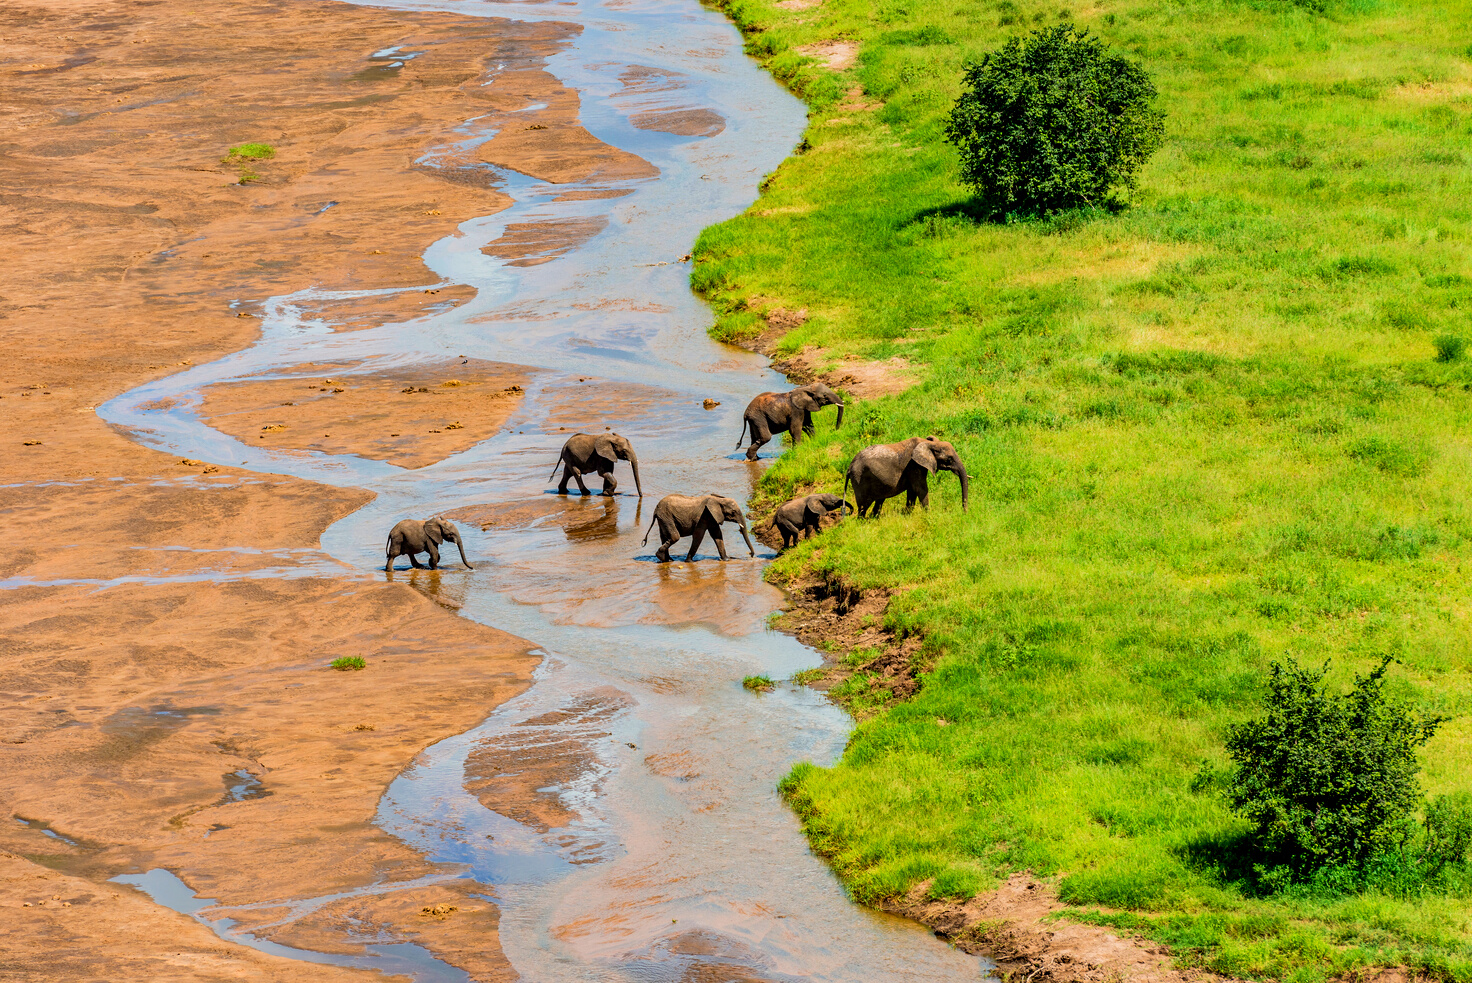 African elephants and the Tarangire River in the Tarangire National Park in Tanzania